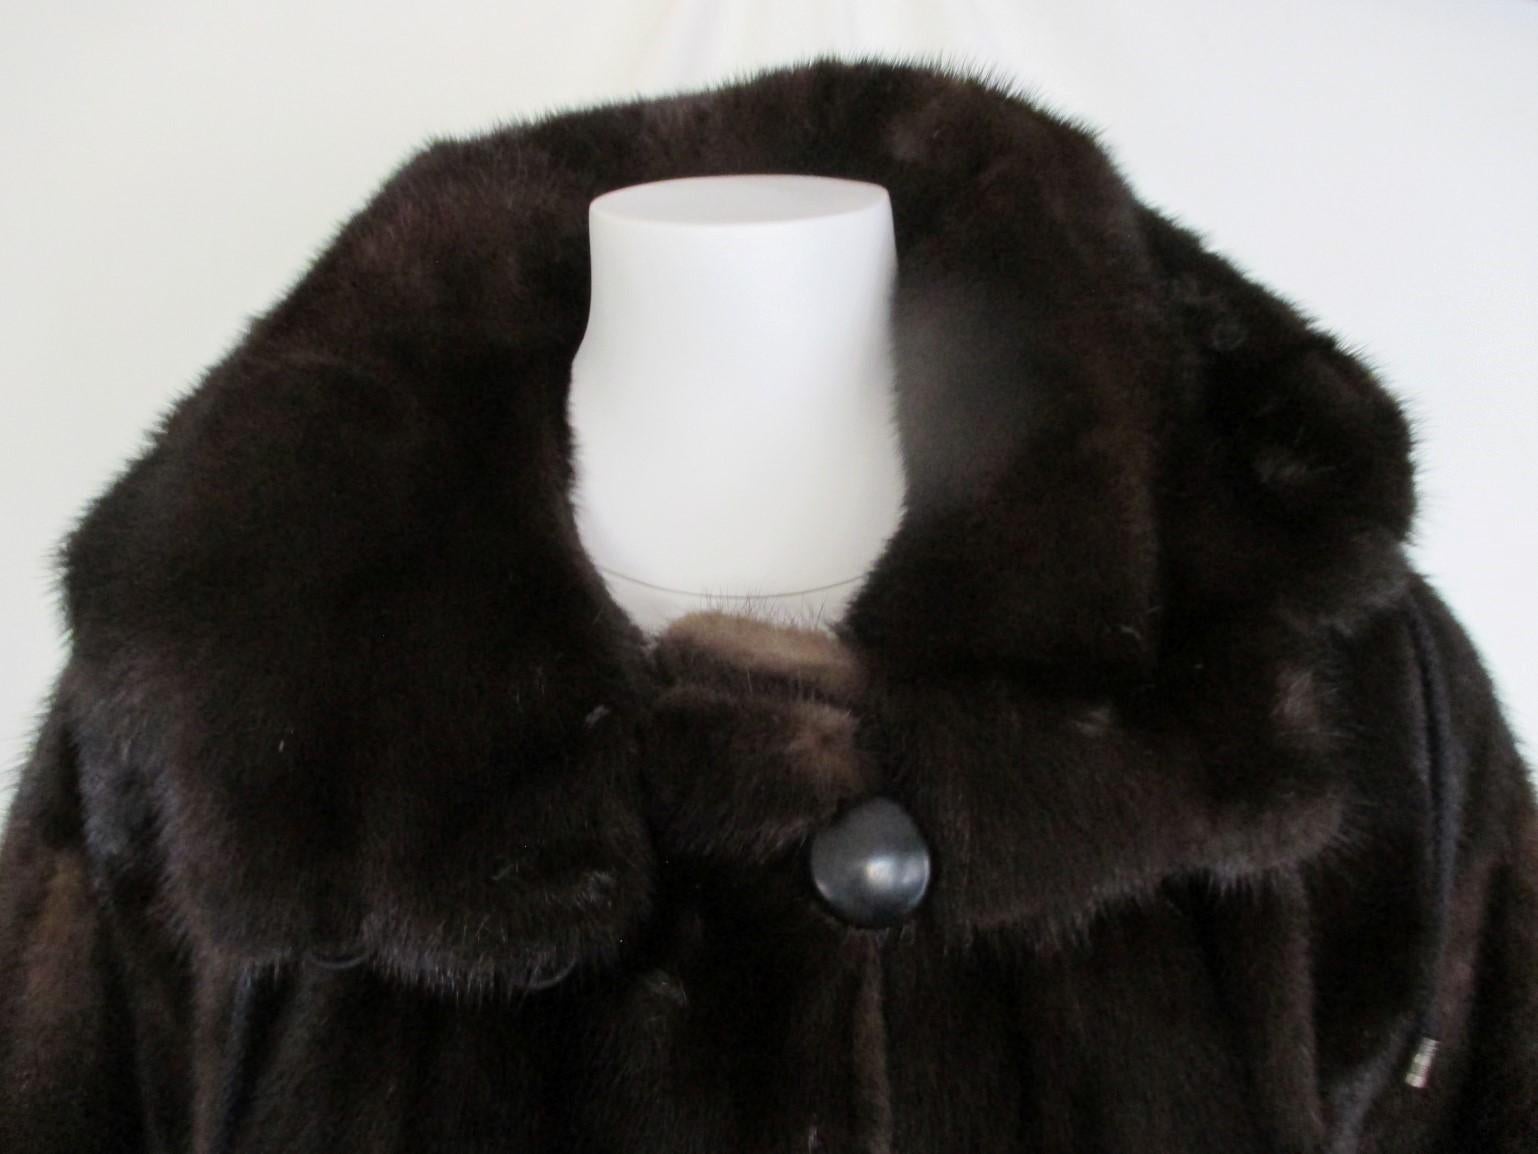 This vintage parka mink coat with a huge collar is rare to find.

We offer more luxury fur items, view our fontstore

Details:
made by furrier Thomas Albrecht , Germany.
It has 2 pockets, 3 closing hooks and 3 leather buttons at the collar.
Can be